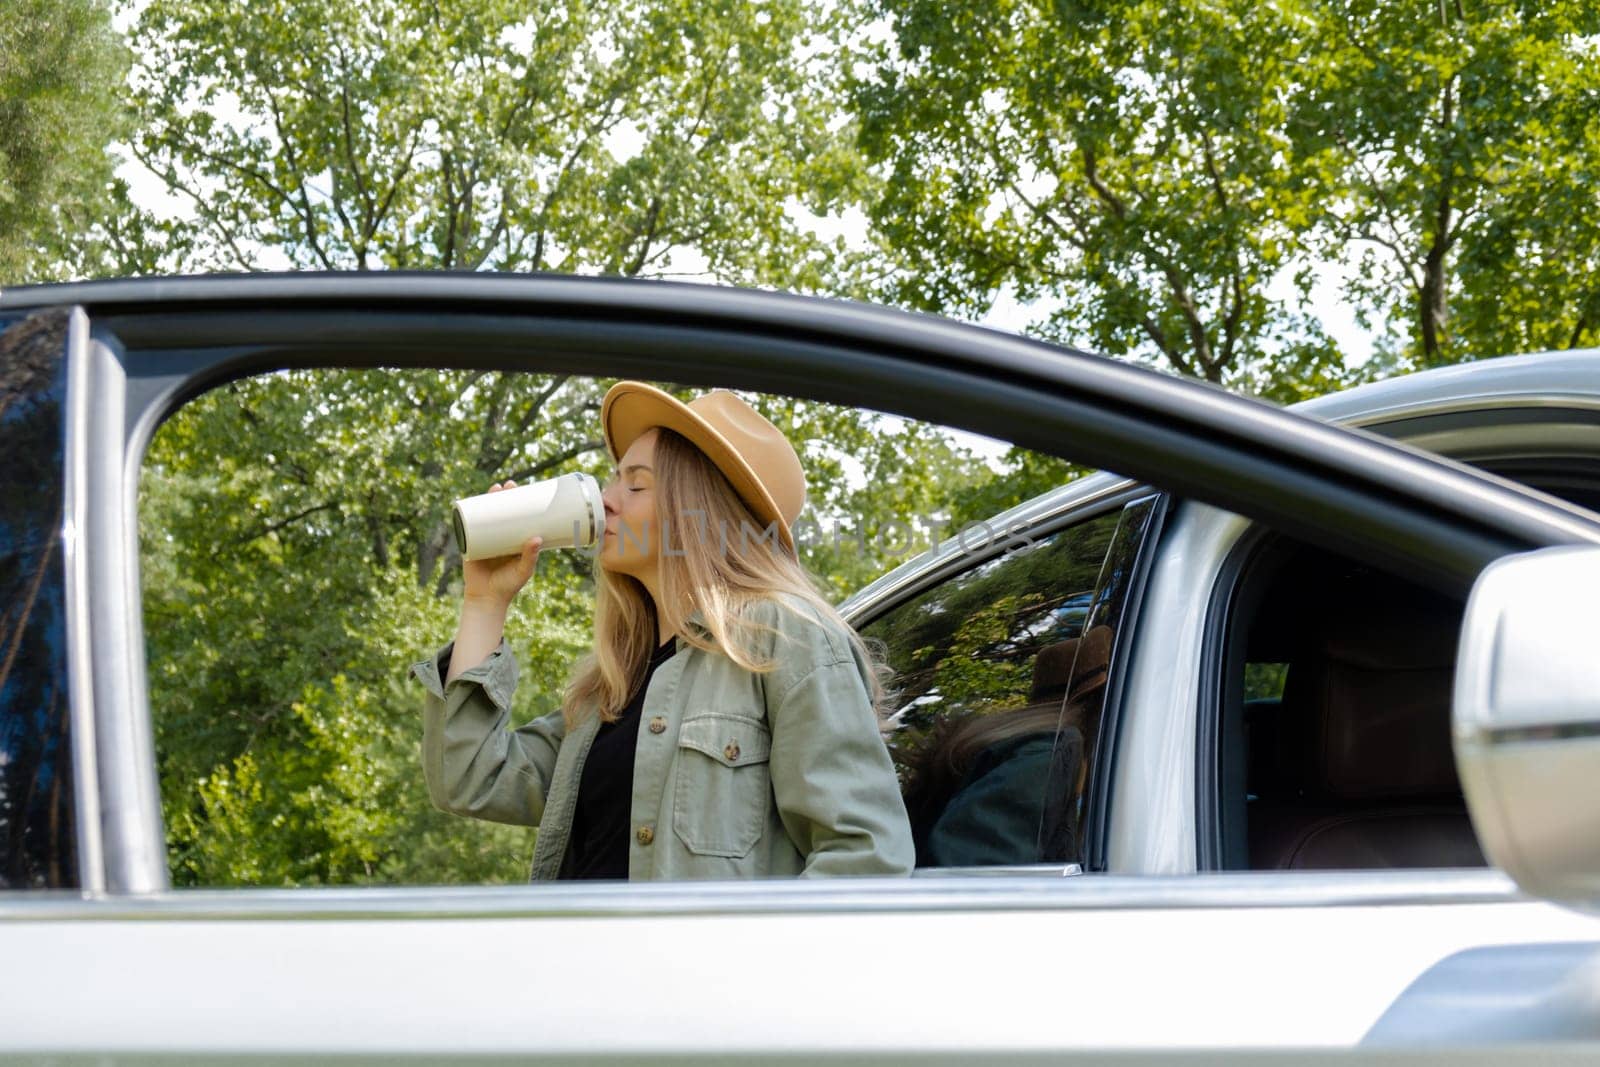 Blonde woman stoped on road next to car and drink coffee or tea from reusable mug. Refuse reuse recycle zero waste concept. Young tourist explore local travel making candid real moments. Responsible traveling reduce carbon footprint by anna_stasiia